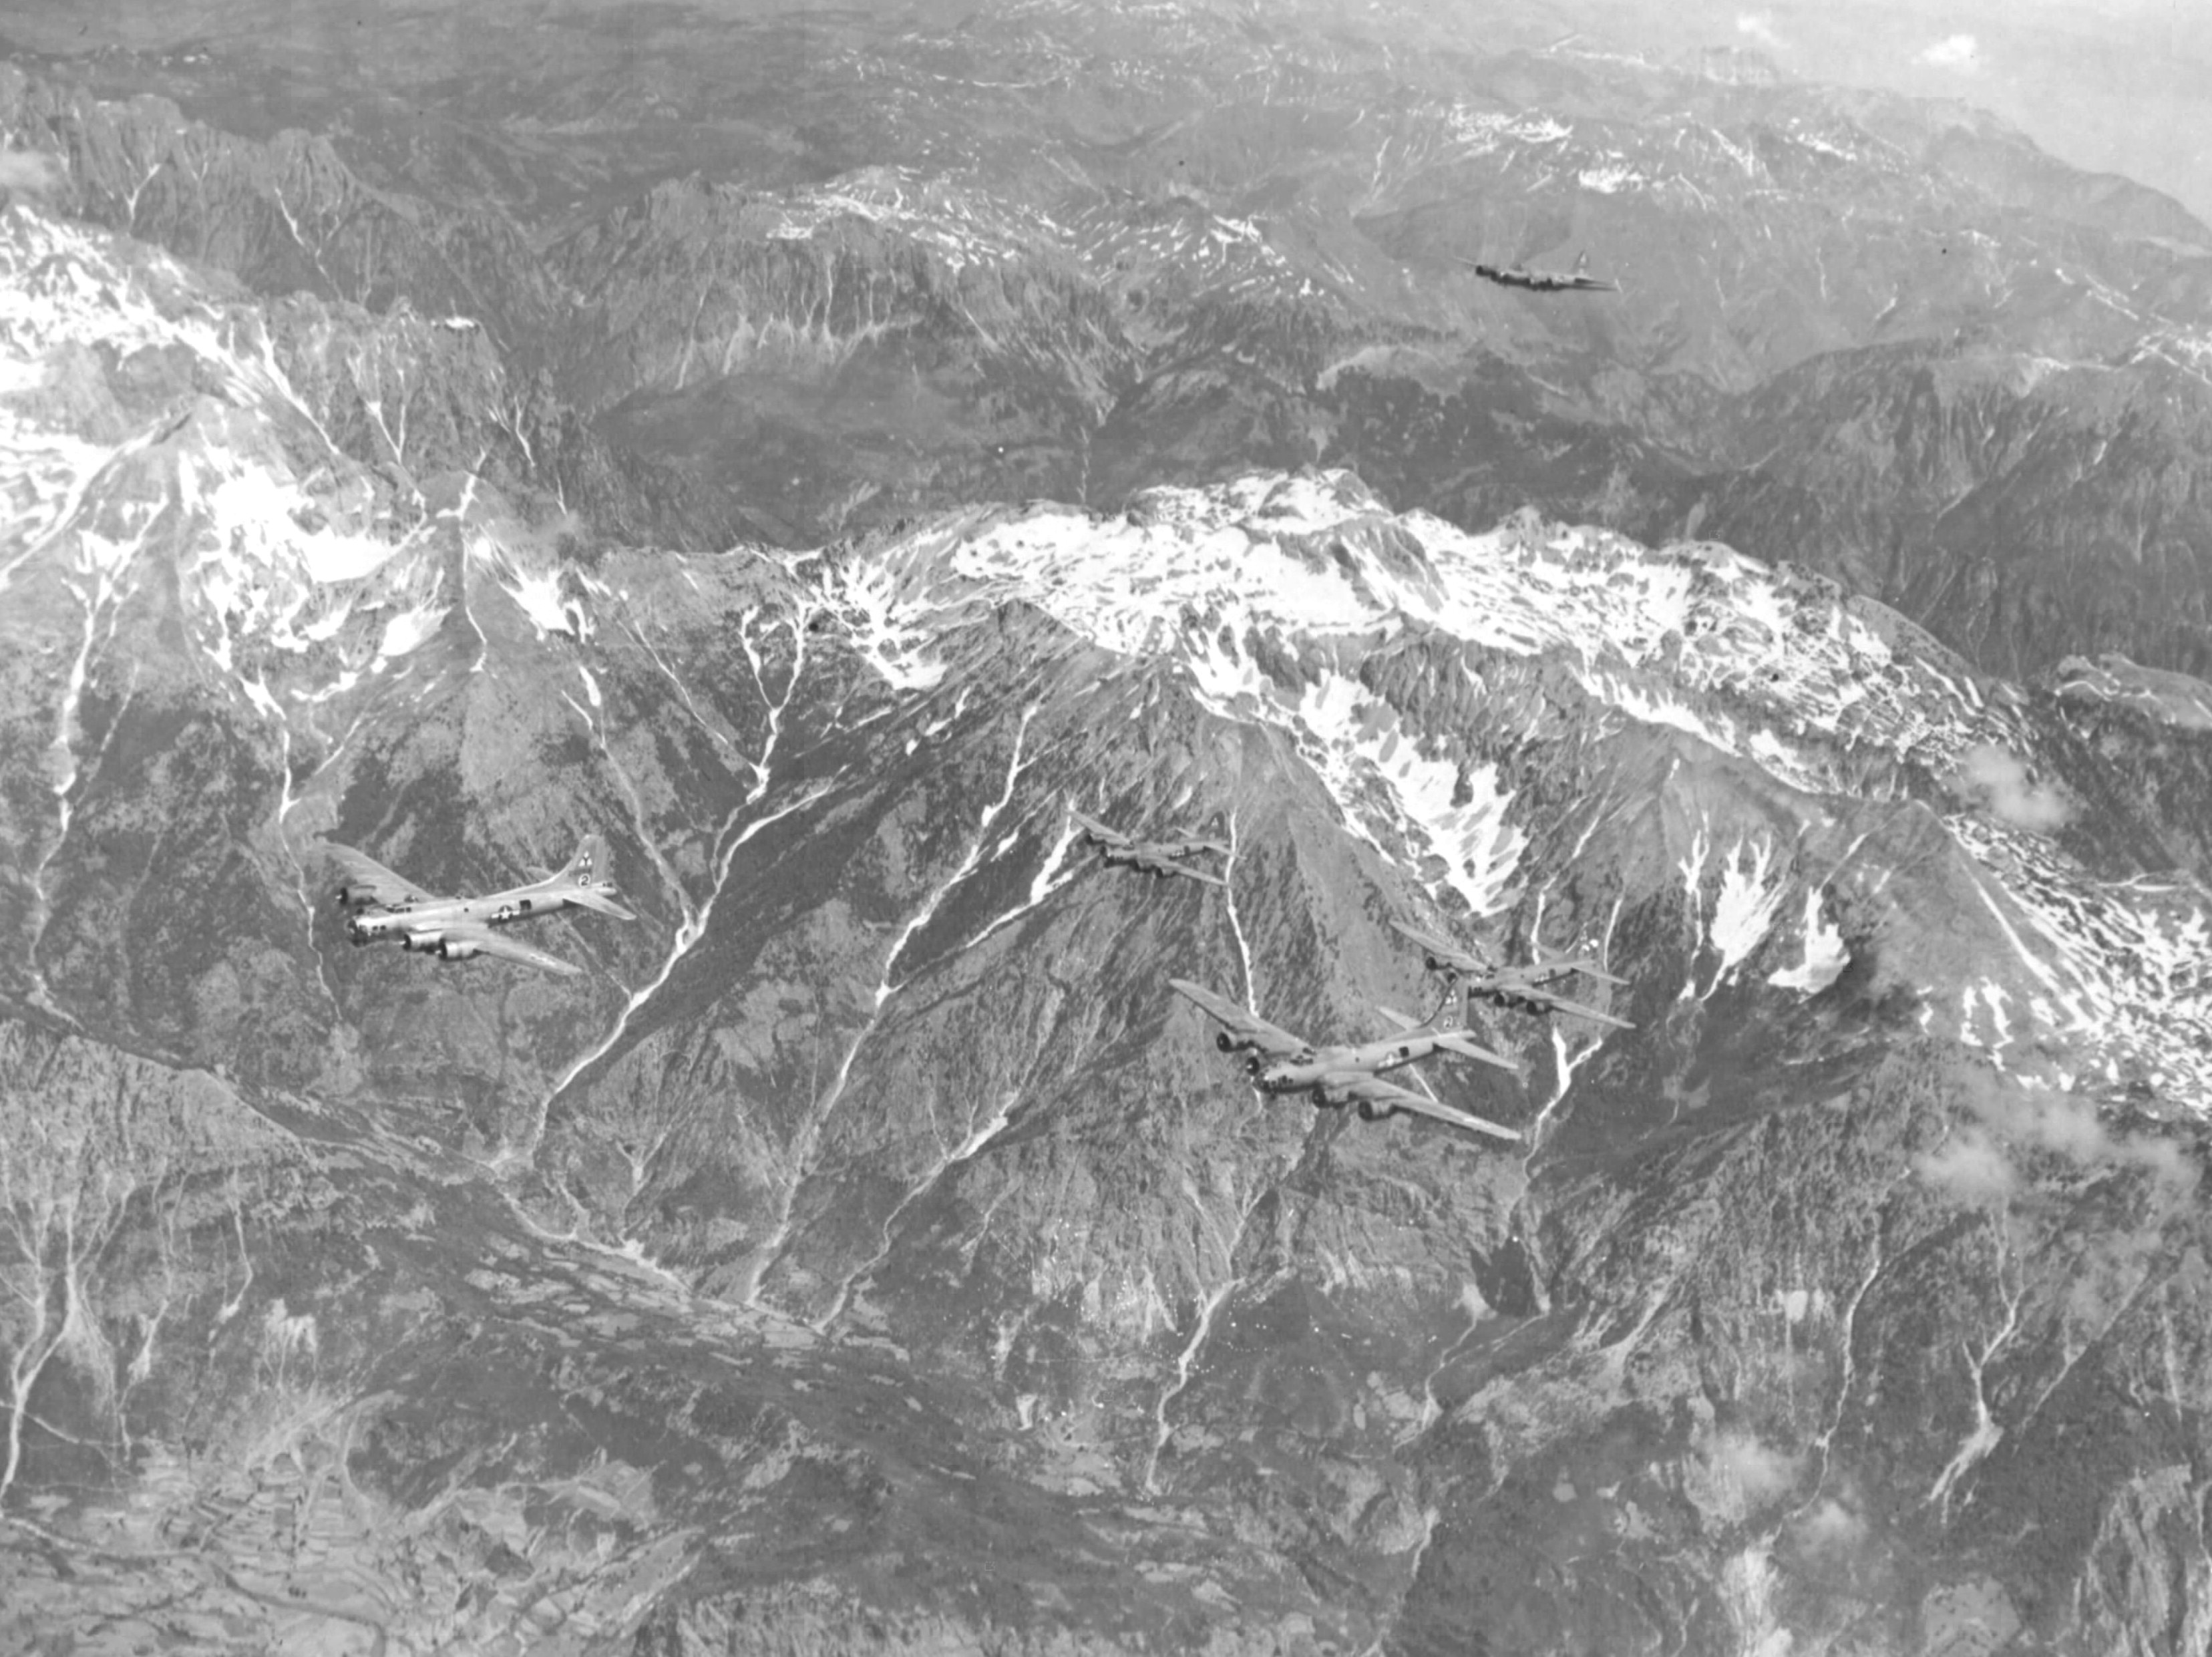 B-17 Fortress bombers of the 97th Bomb Group based in Italy flying over the Dinaric Alps in Yugoslavia on their way to bases in Ukraine as part of Operation Frantic, 2 Jun 1944.